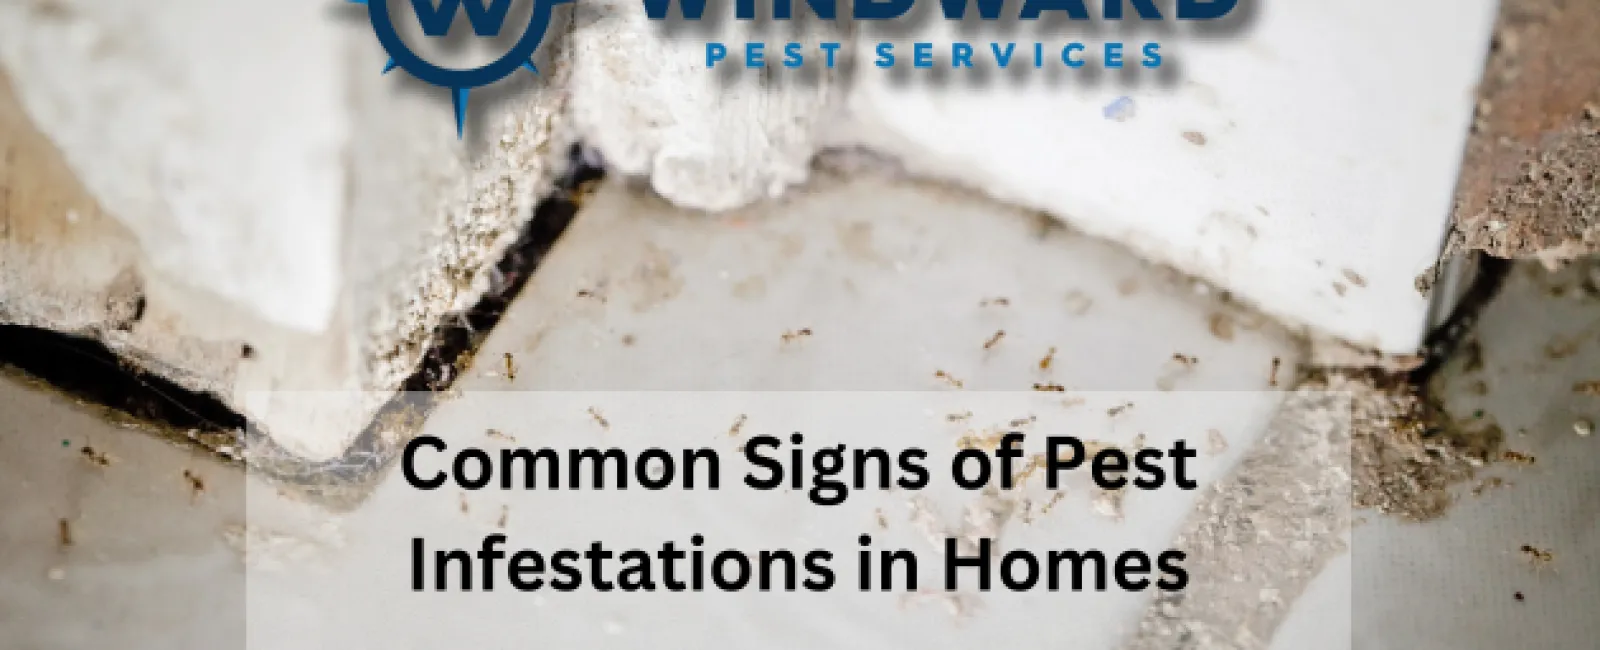 Common Signs of Pest Infestations in Homes